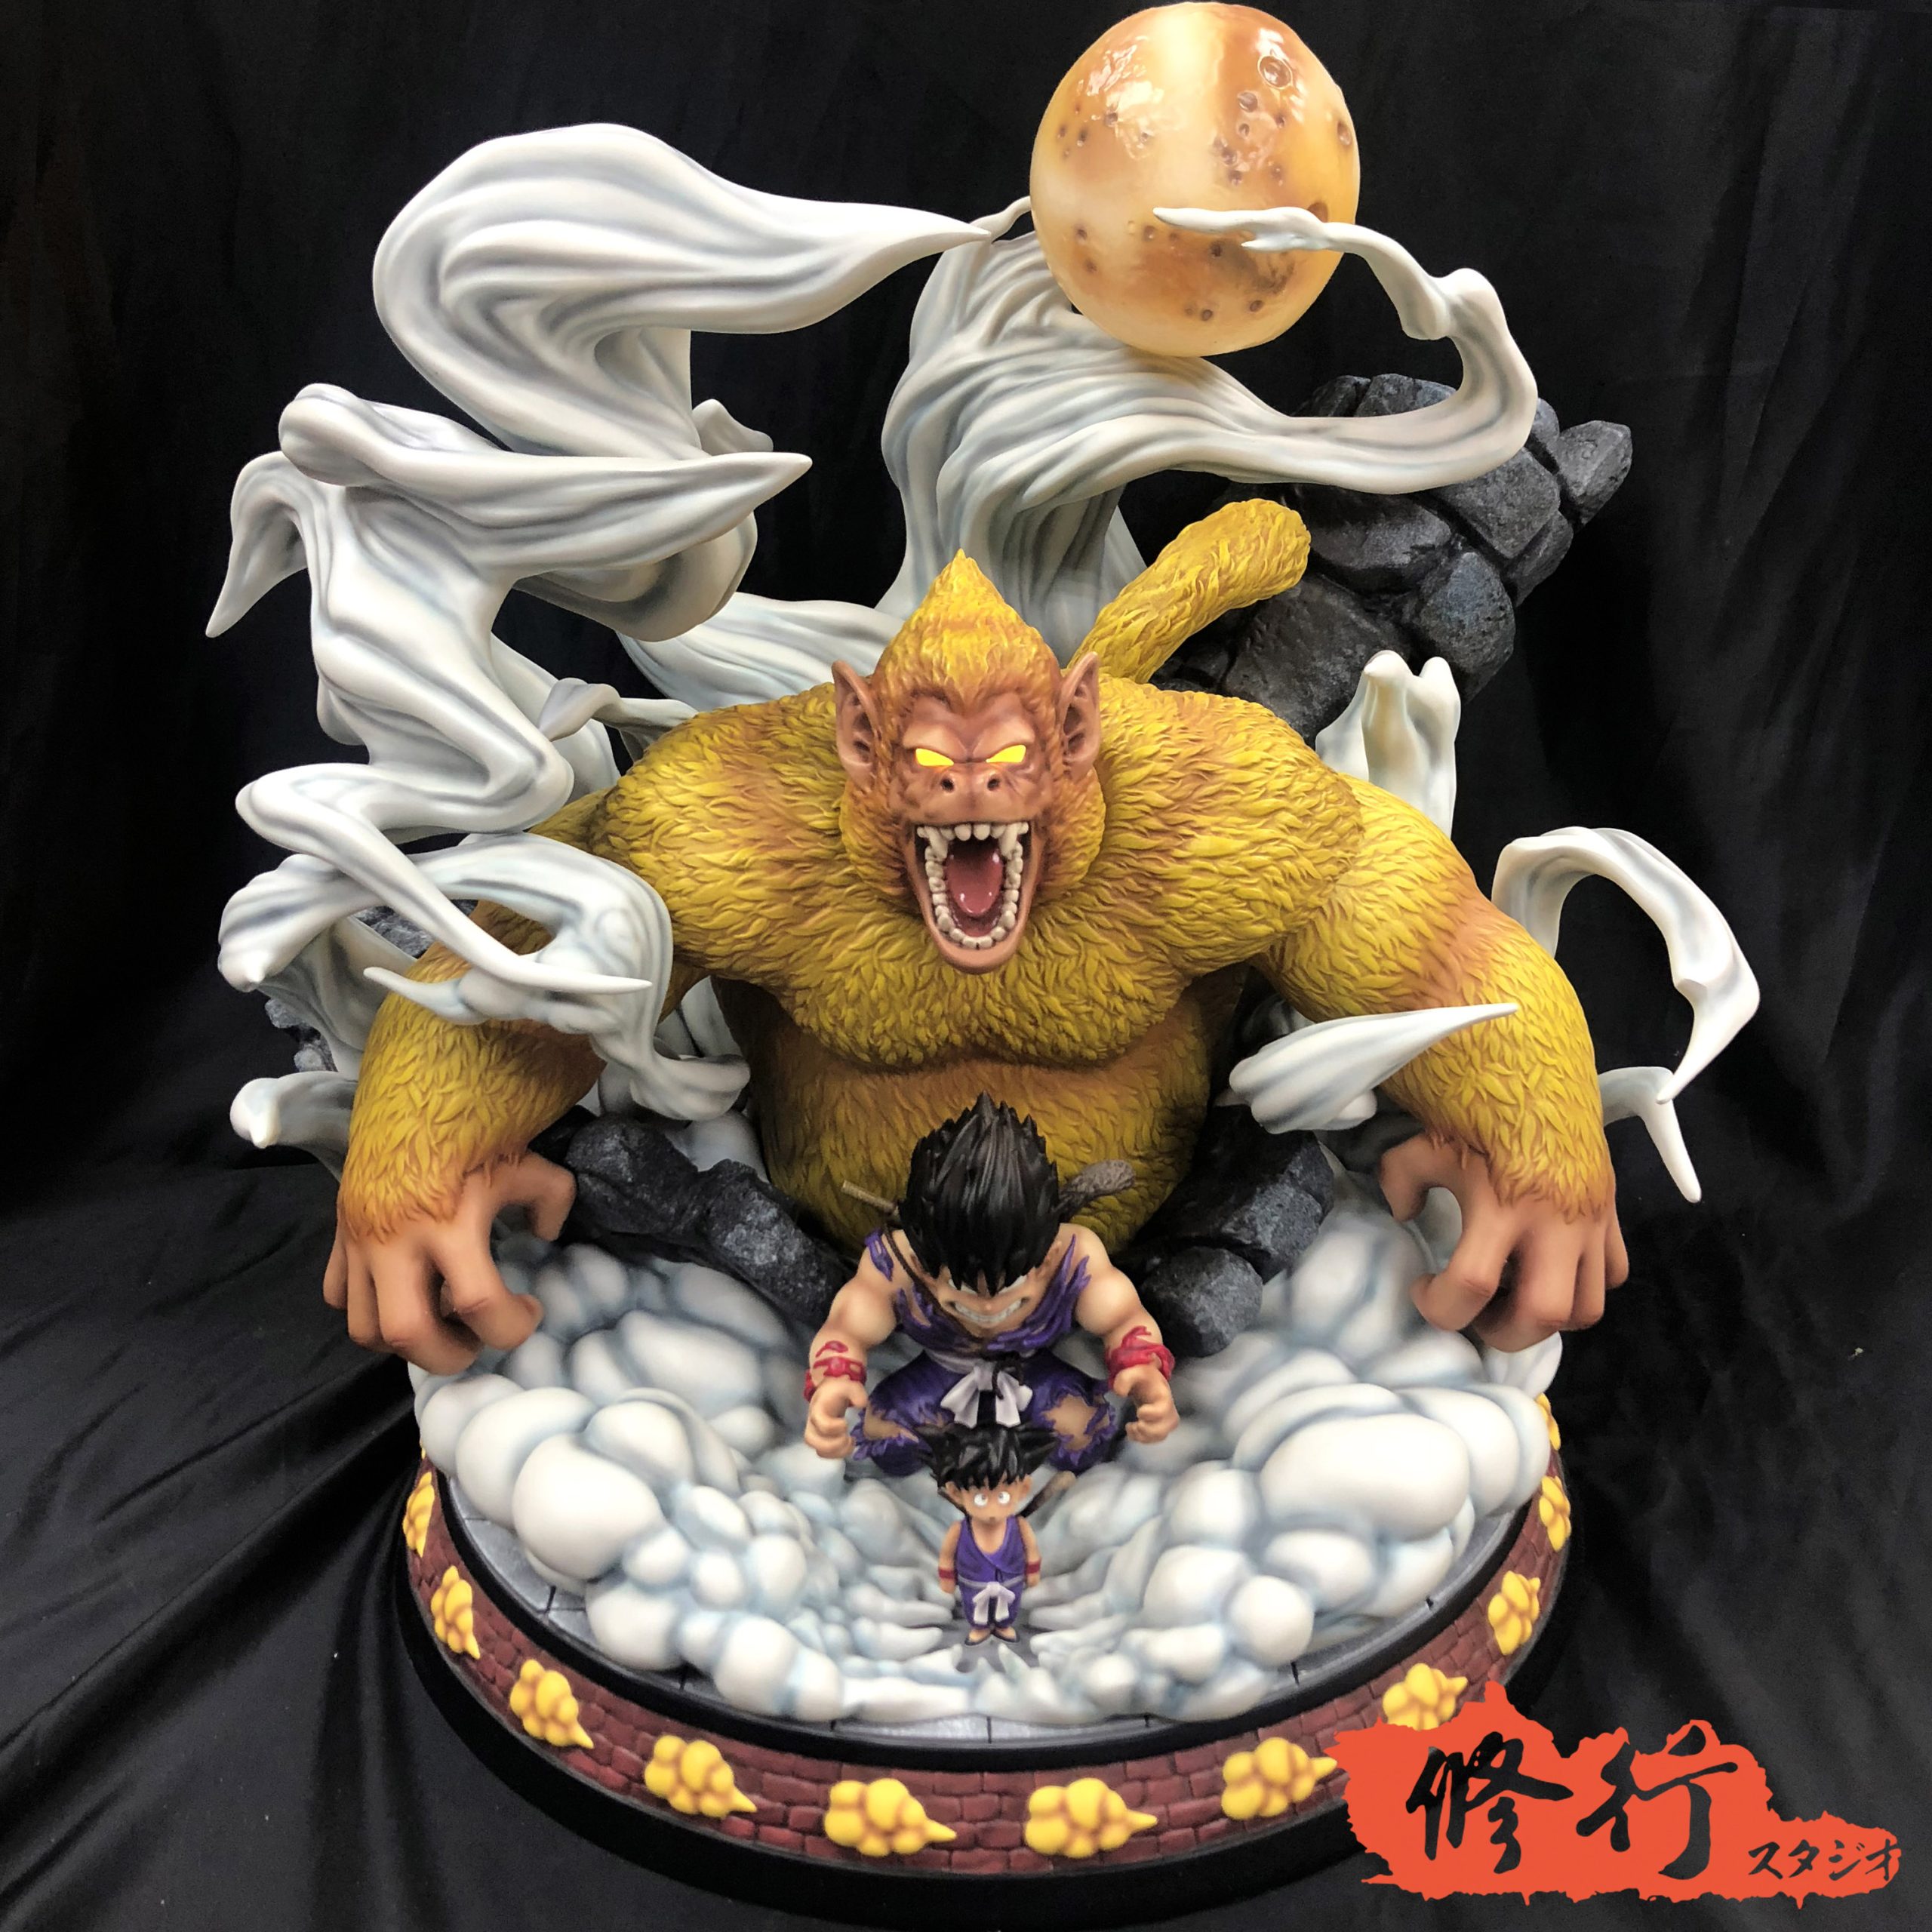 Bandai Dragonball Evolution Movie 4 Inch Goku Oozaru The Big - Dragonball  Evolution Movie 4 Inch Goku Oozaru The Big . Buy Goku toys in India. shop  for Bandai products in India.